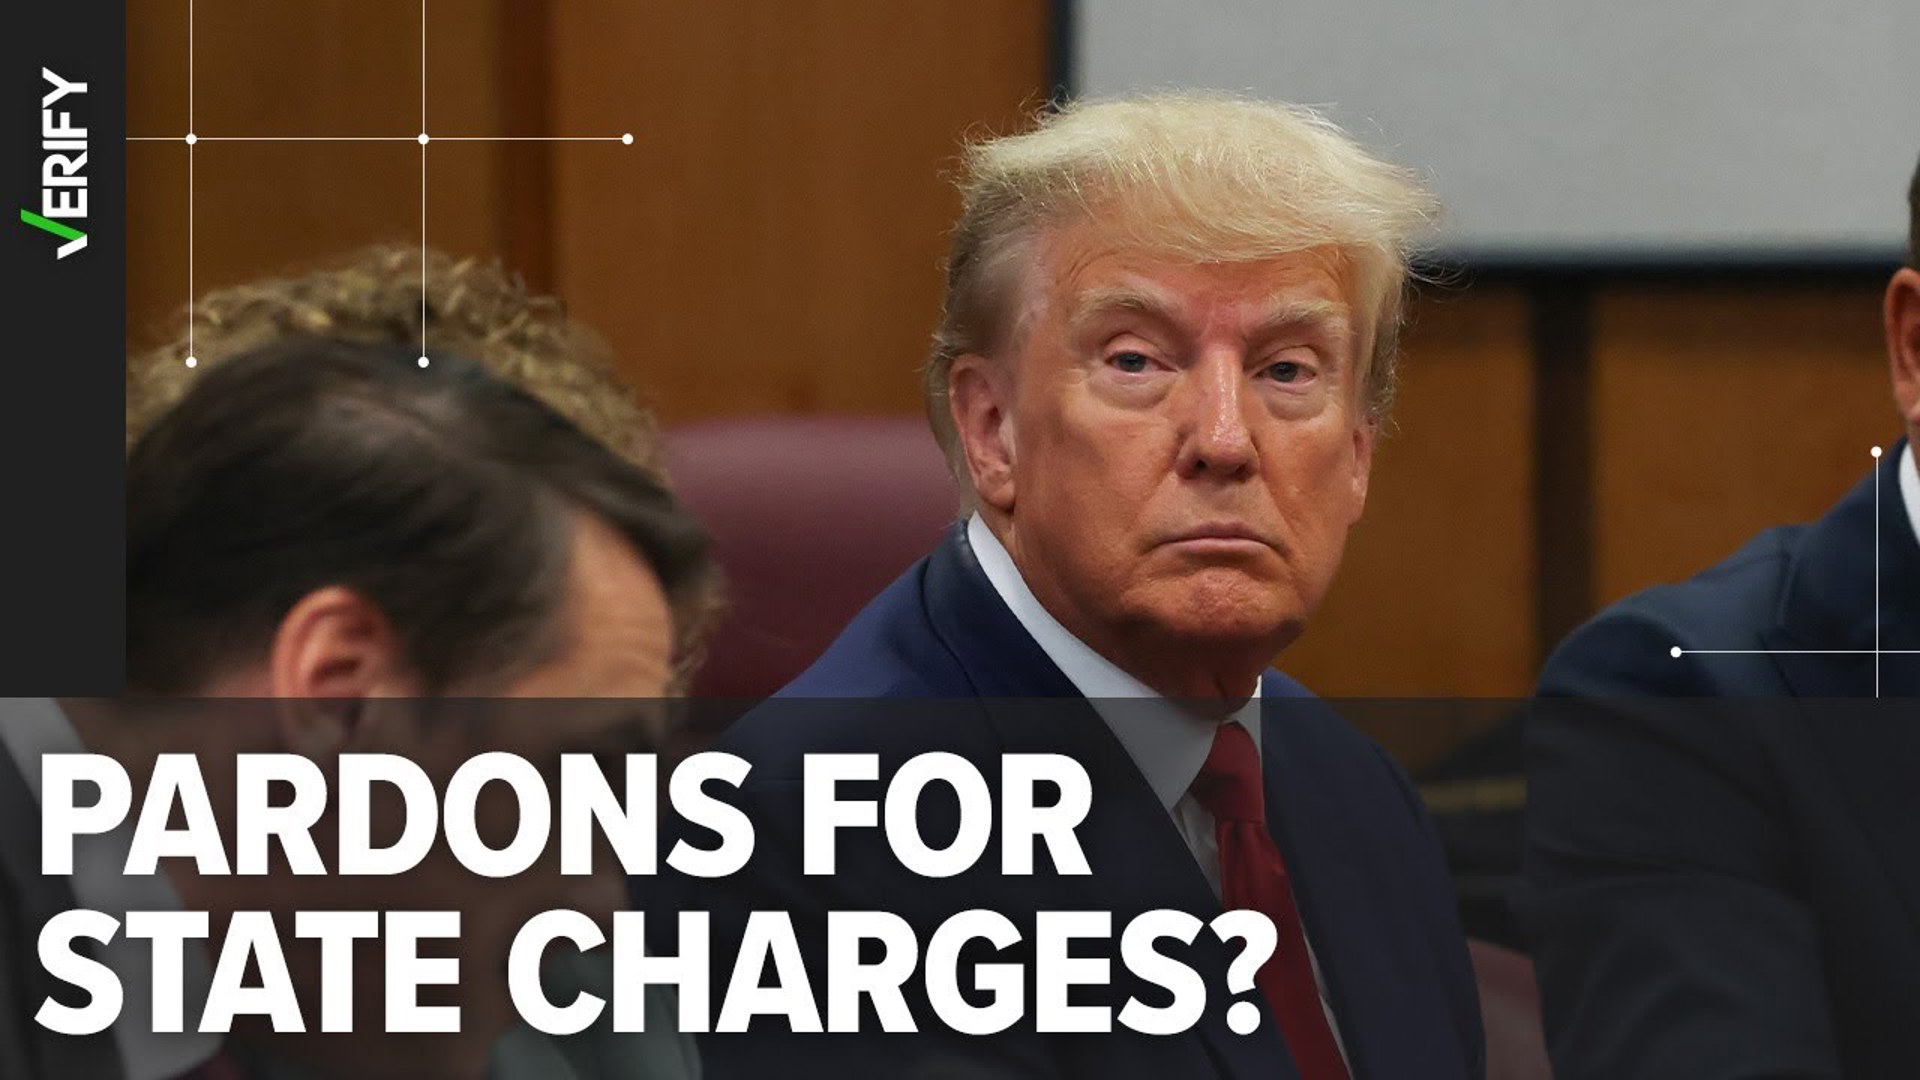 Presidents have broad powers when it comes to pardons for federal crimes. Trump’s conviction was for state crimes.